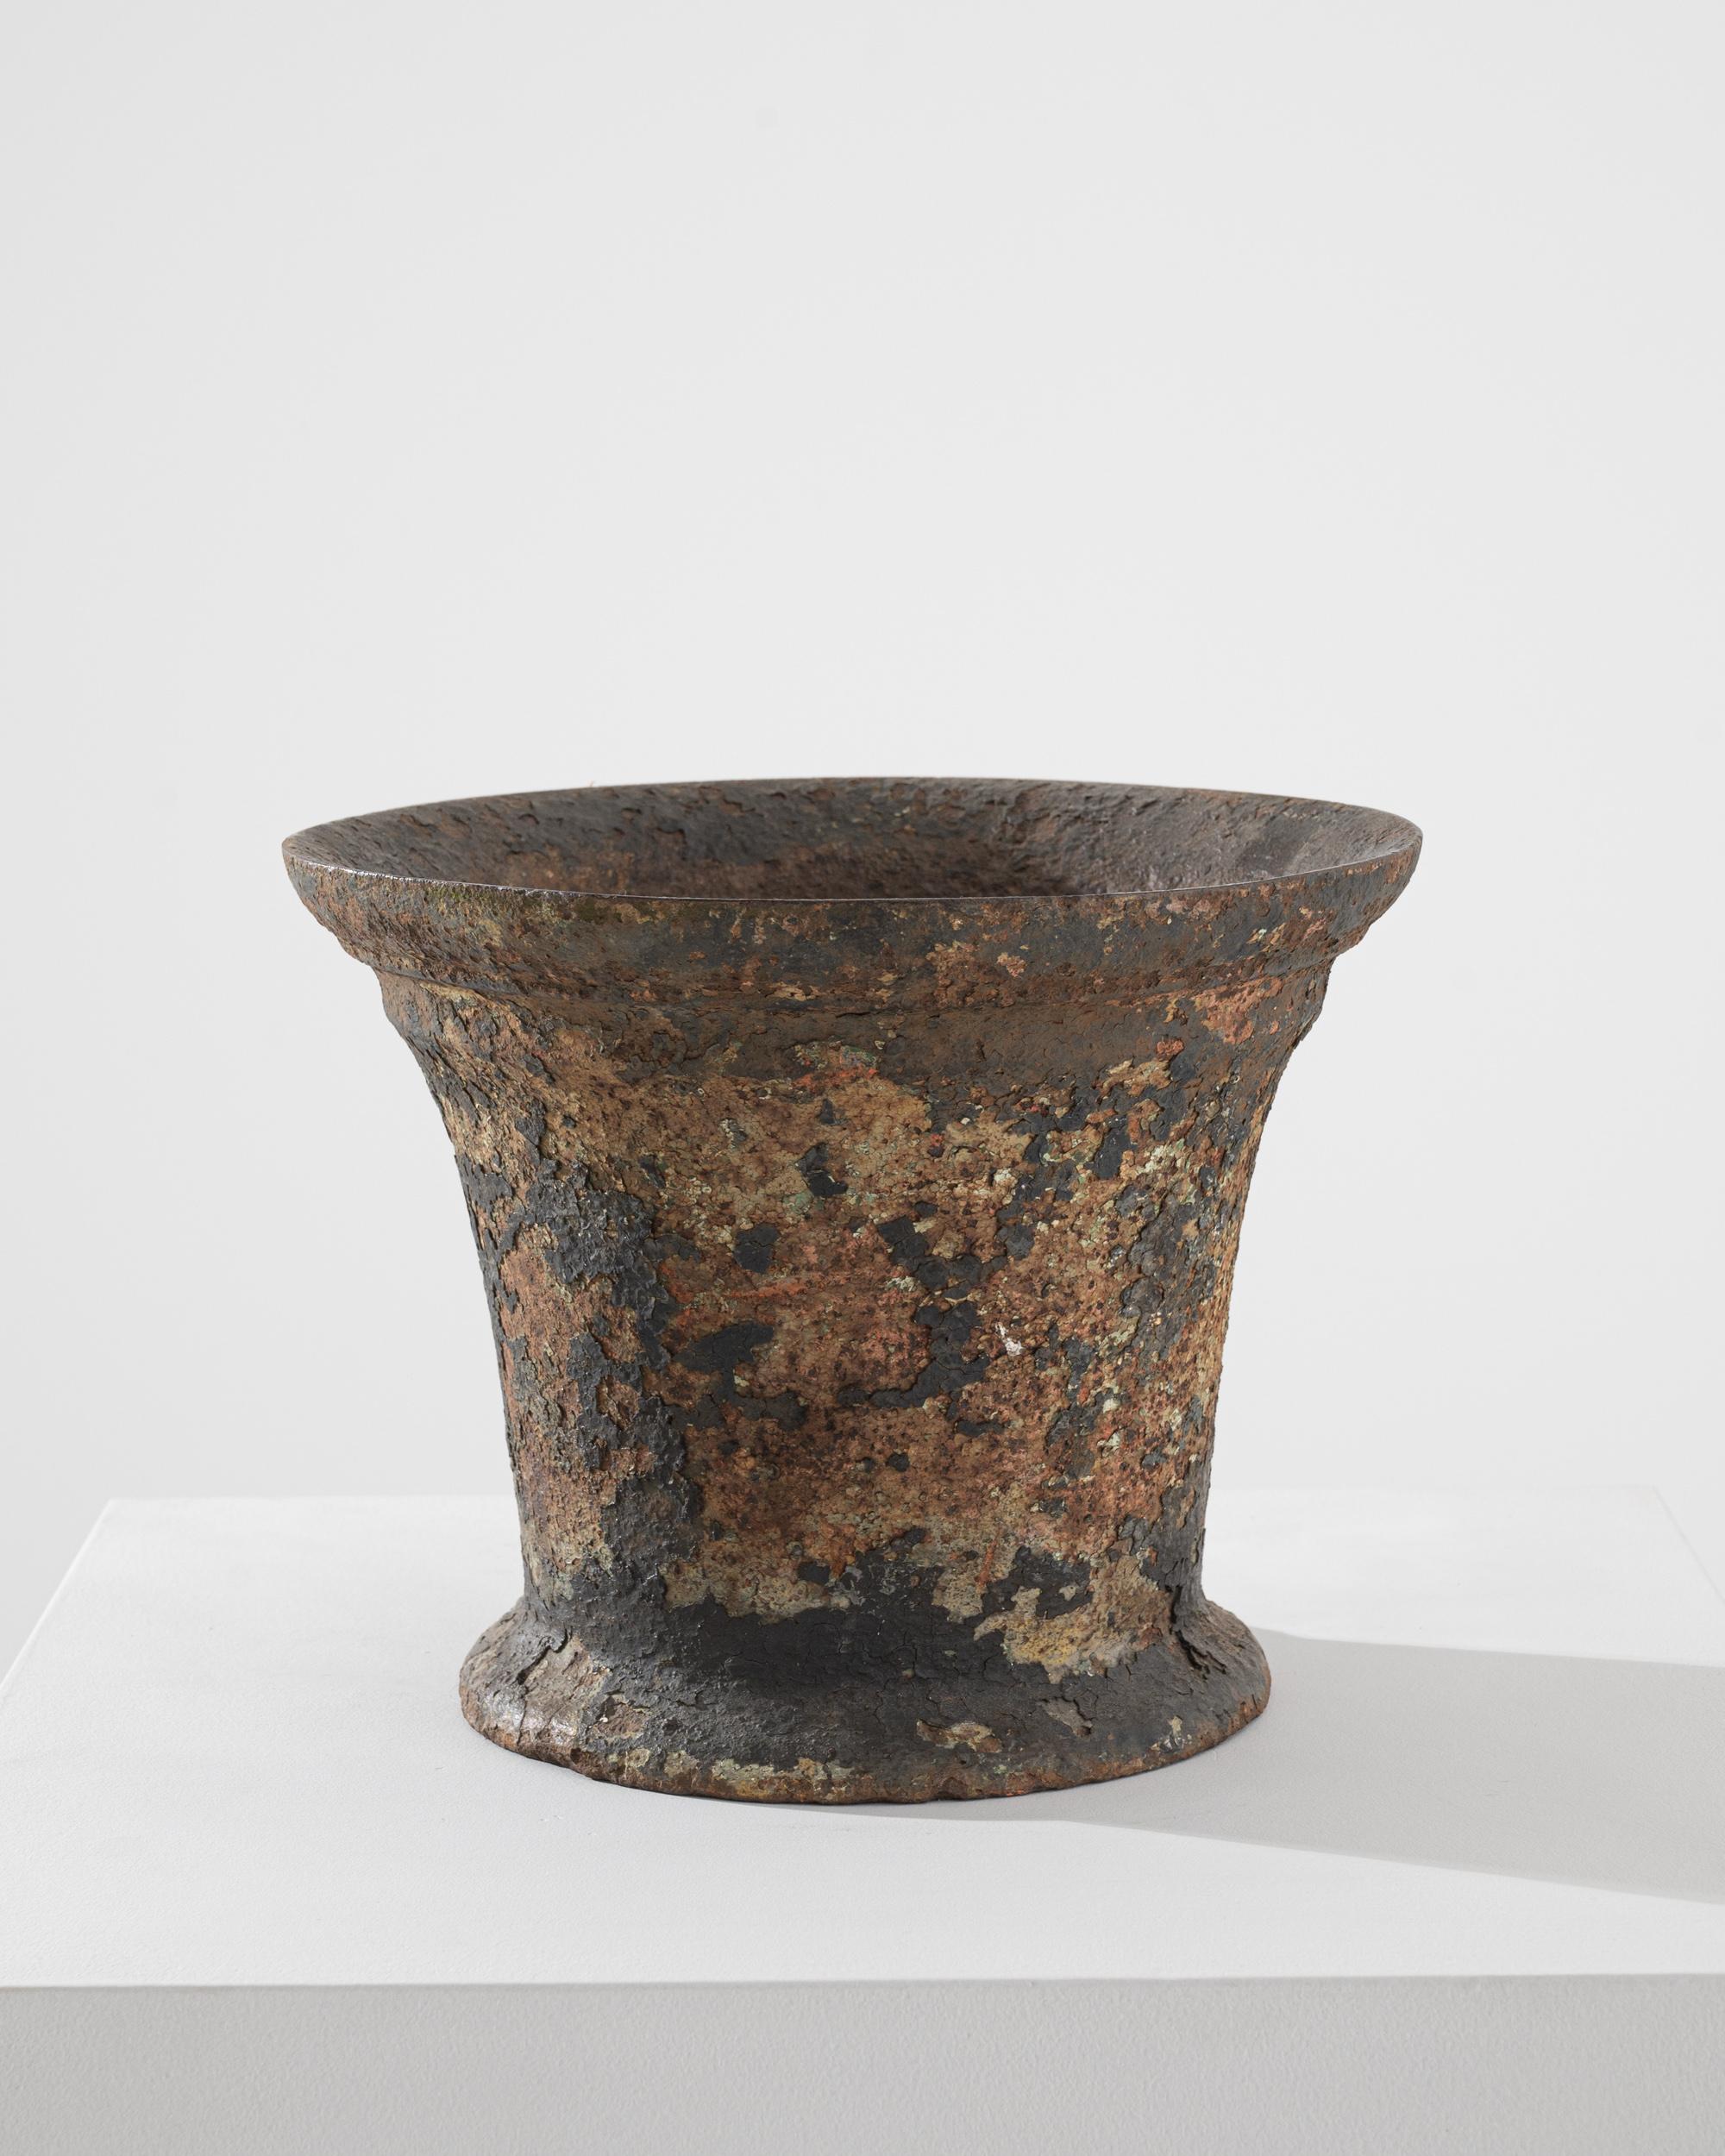 This cast iron mortar and pestle was made in France in the 1700s. In the eighteenth century, this important device would equip most chemists and apothecaries, mortar and pestles were used to grind spices or mix ointments. The chalice-shaped mortar